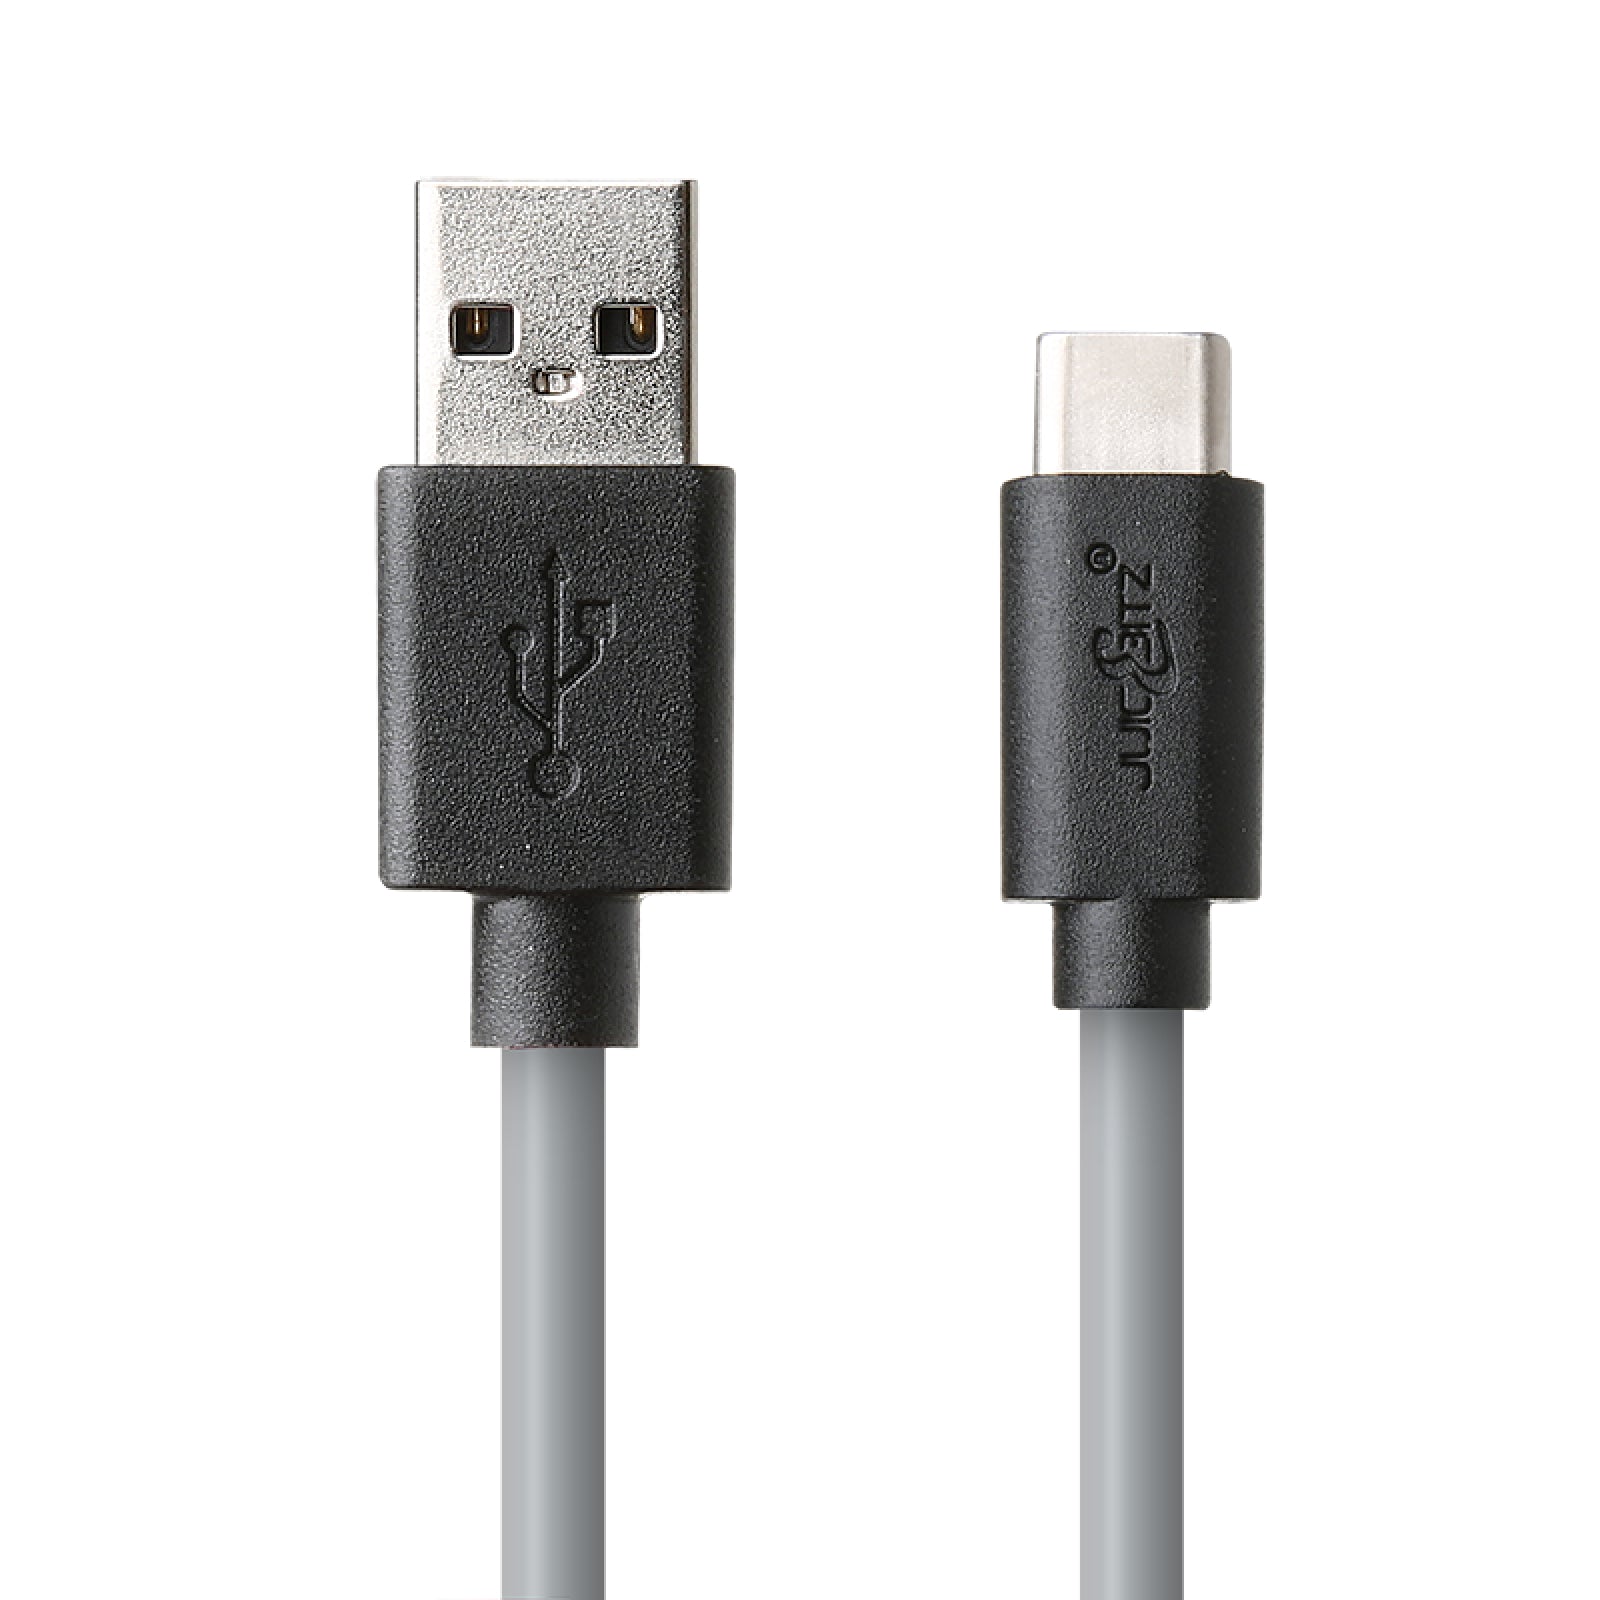 USB-A to C 3A Fast Charging Cable